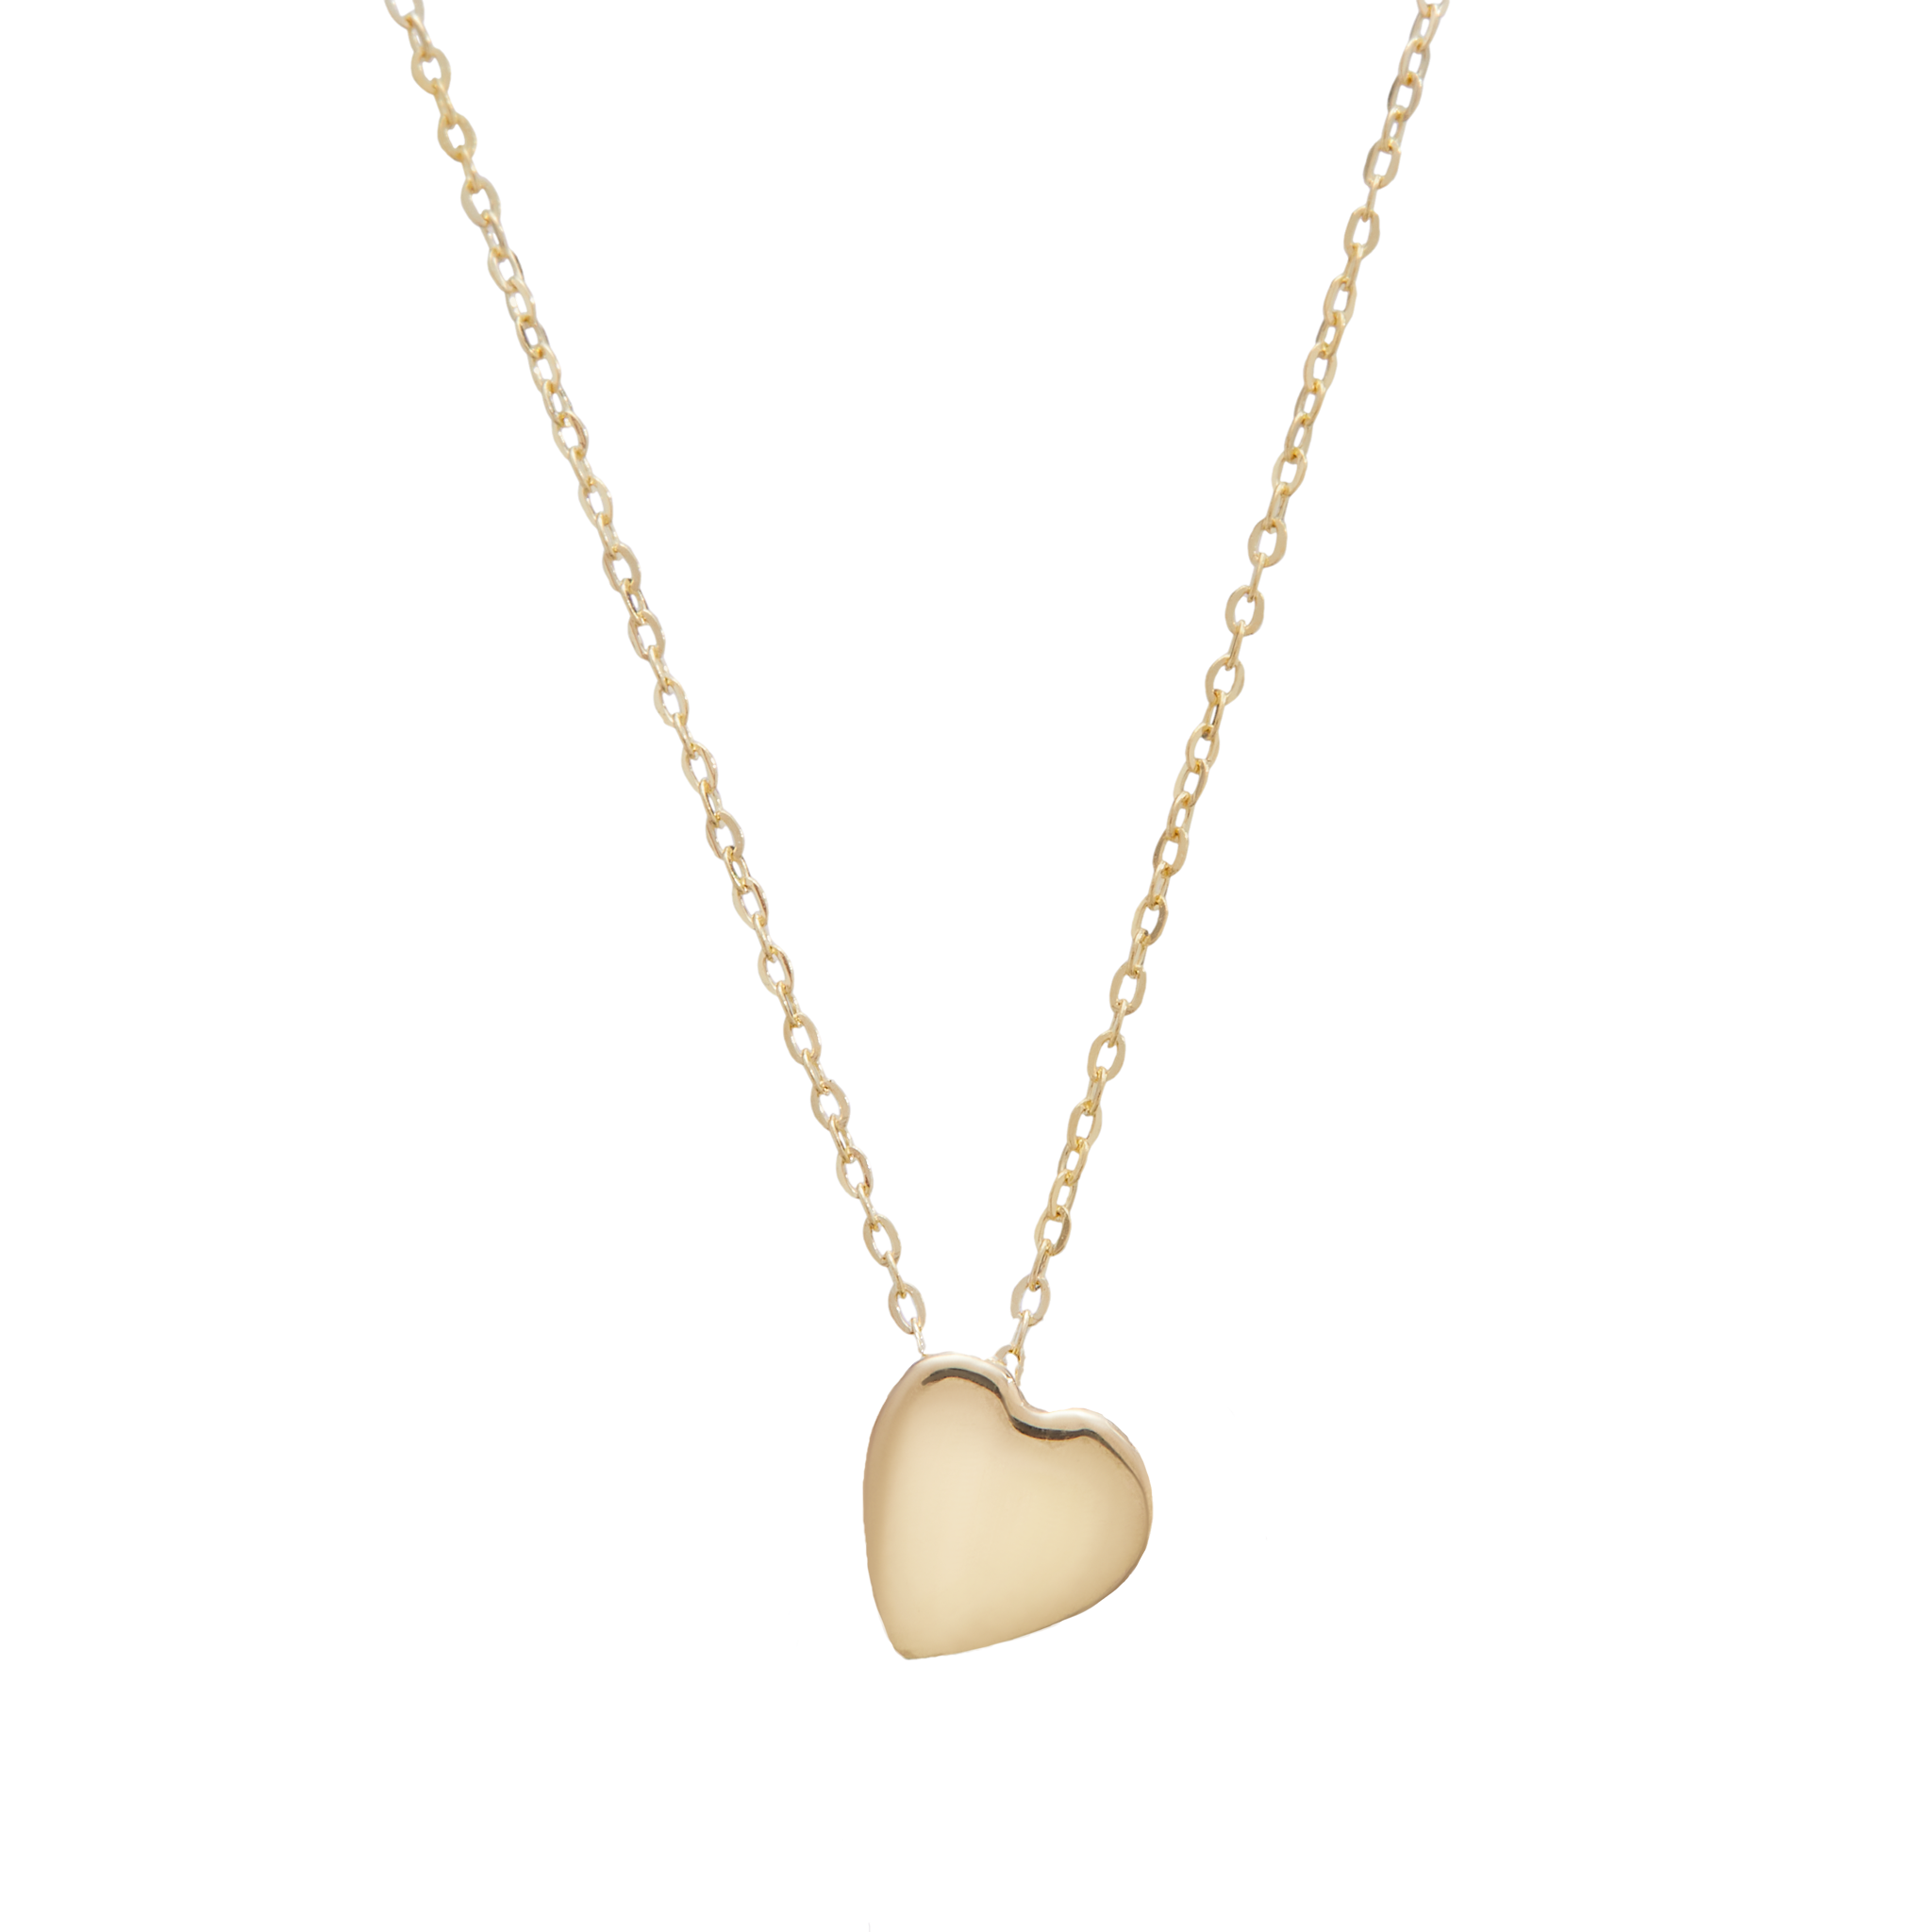 Mini Heart of Gold Necklace made of 18K Gold on a 16"-18" Gold Chain